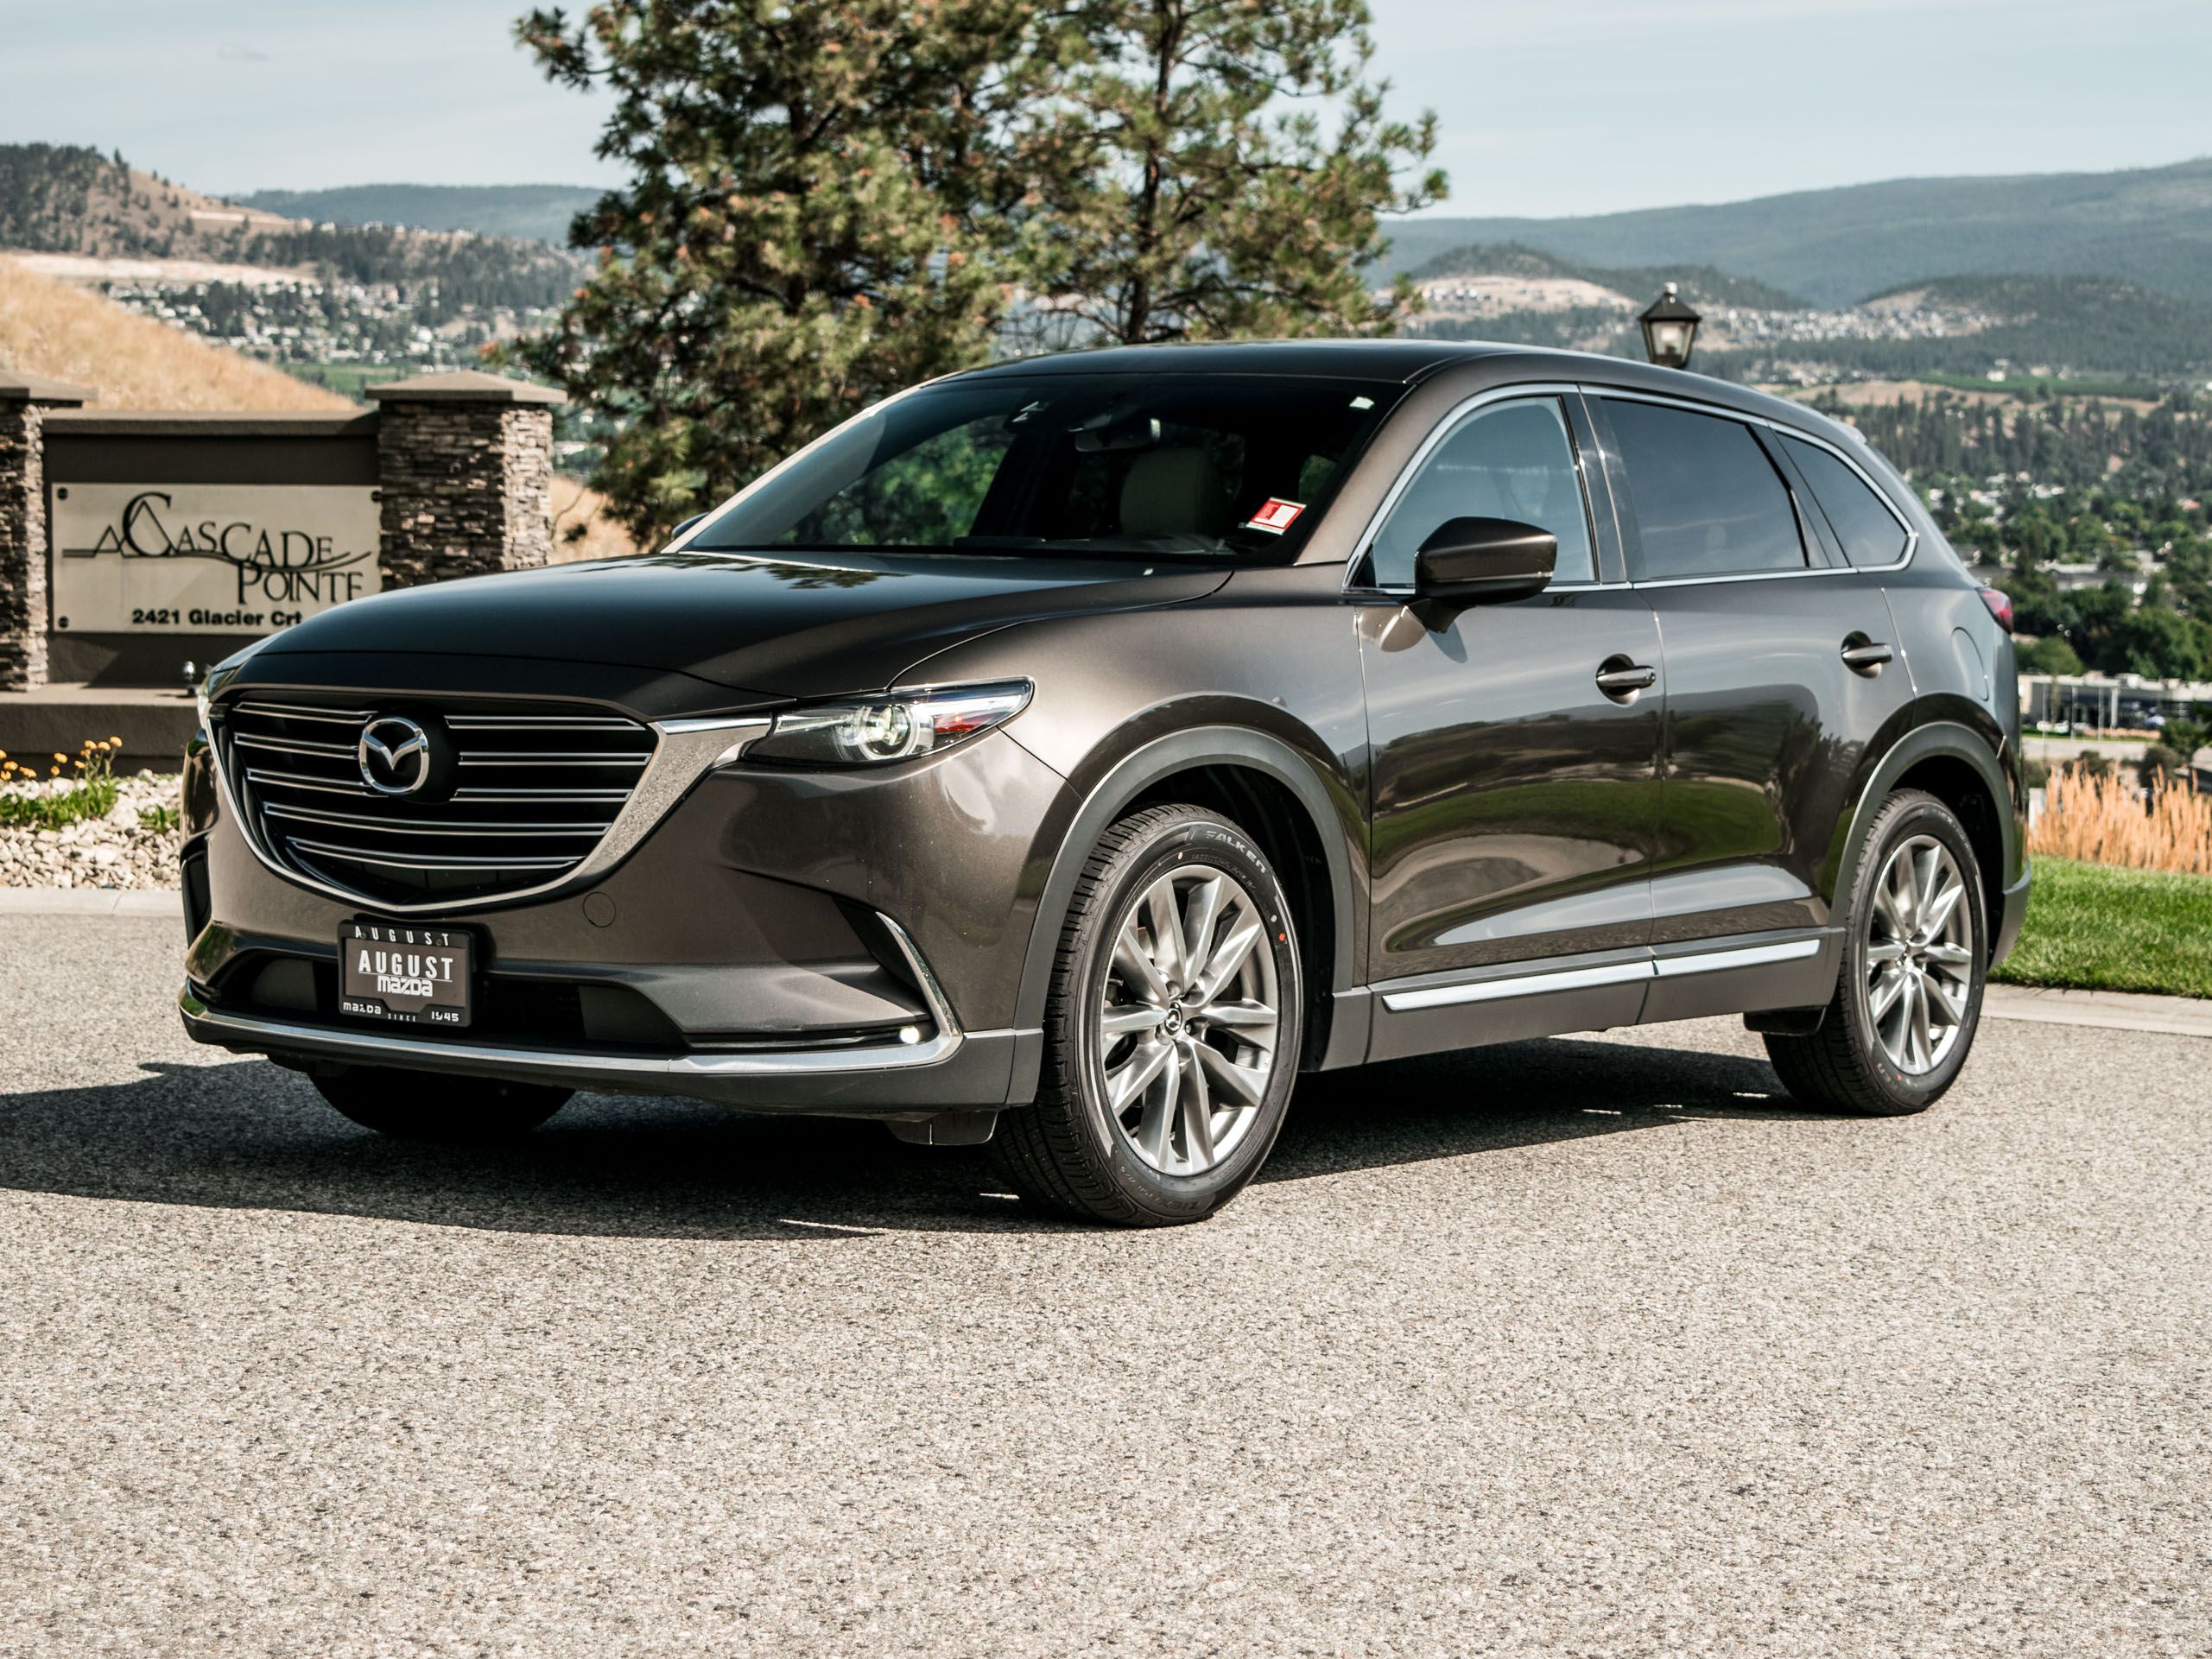 Pre-Owned 2017 Mazda CX-9 GT With Navigation & AWD